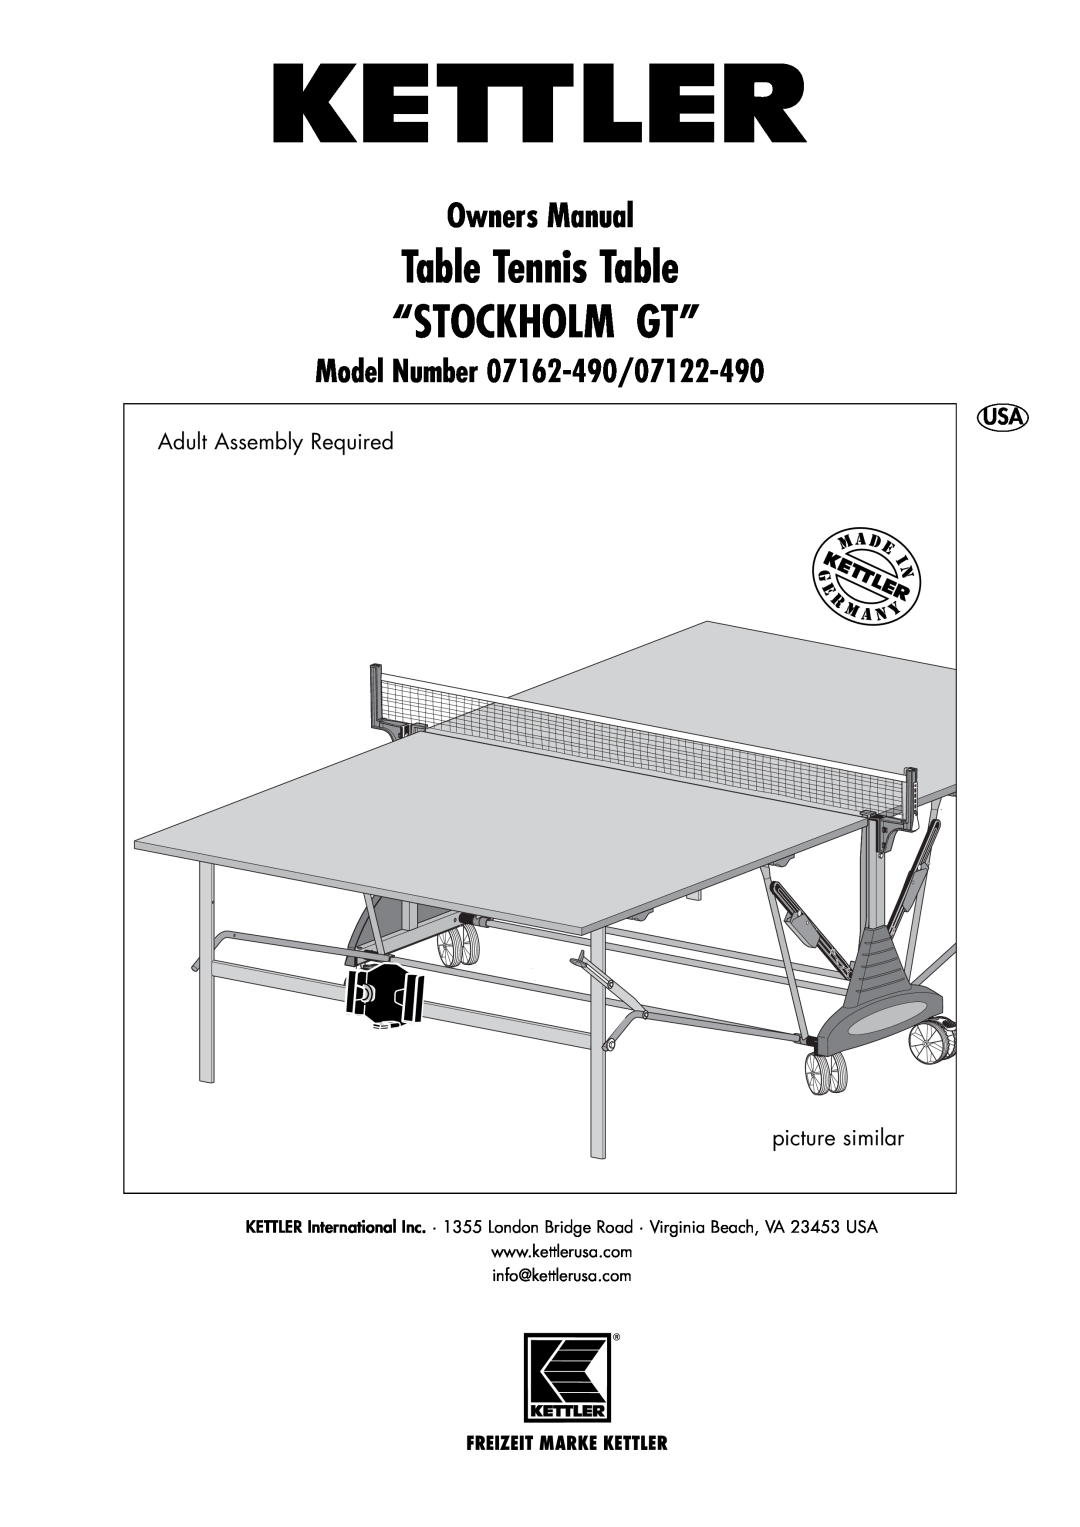 Kettler 07122-490 owner manual Adult Assembly Required, picture similar, Table Tennis Table “STOCKHOLM GT”, Owners Manual 